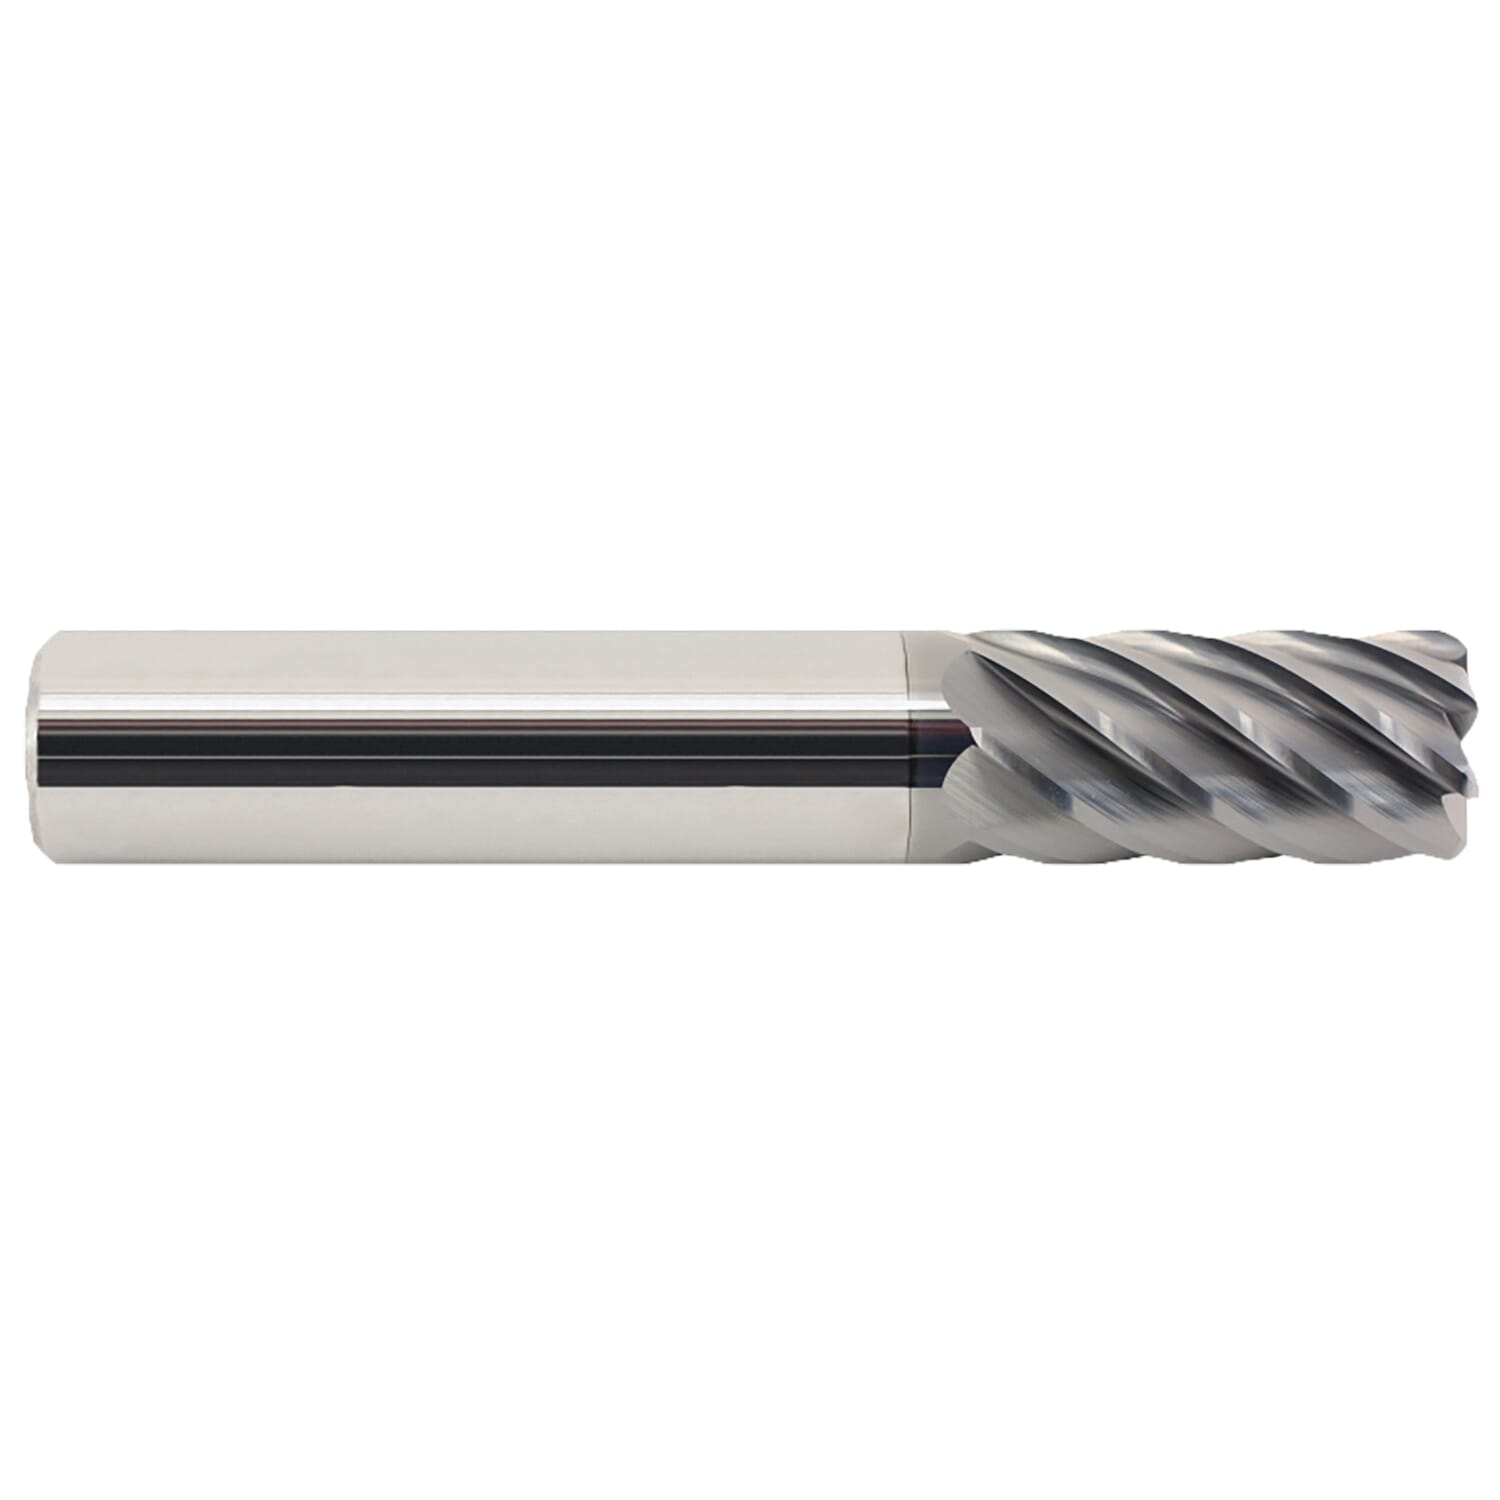 AlCrN COATED SQUARE END 5/8" 6 FLUTE CARBIDE END MILL 